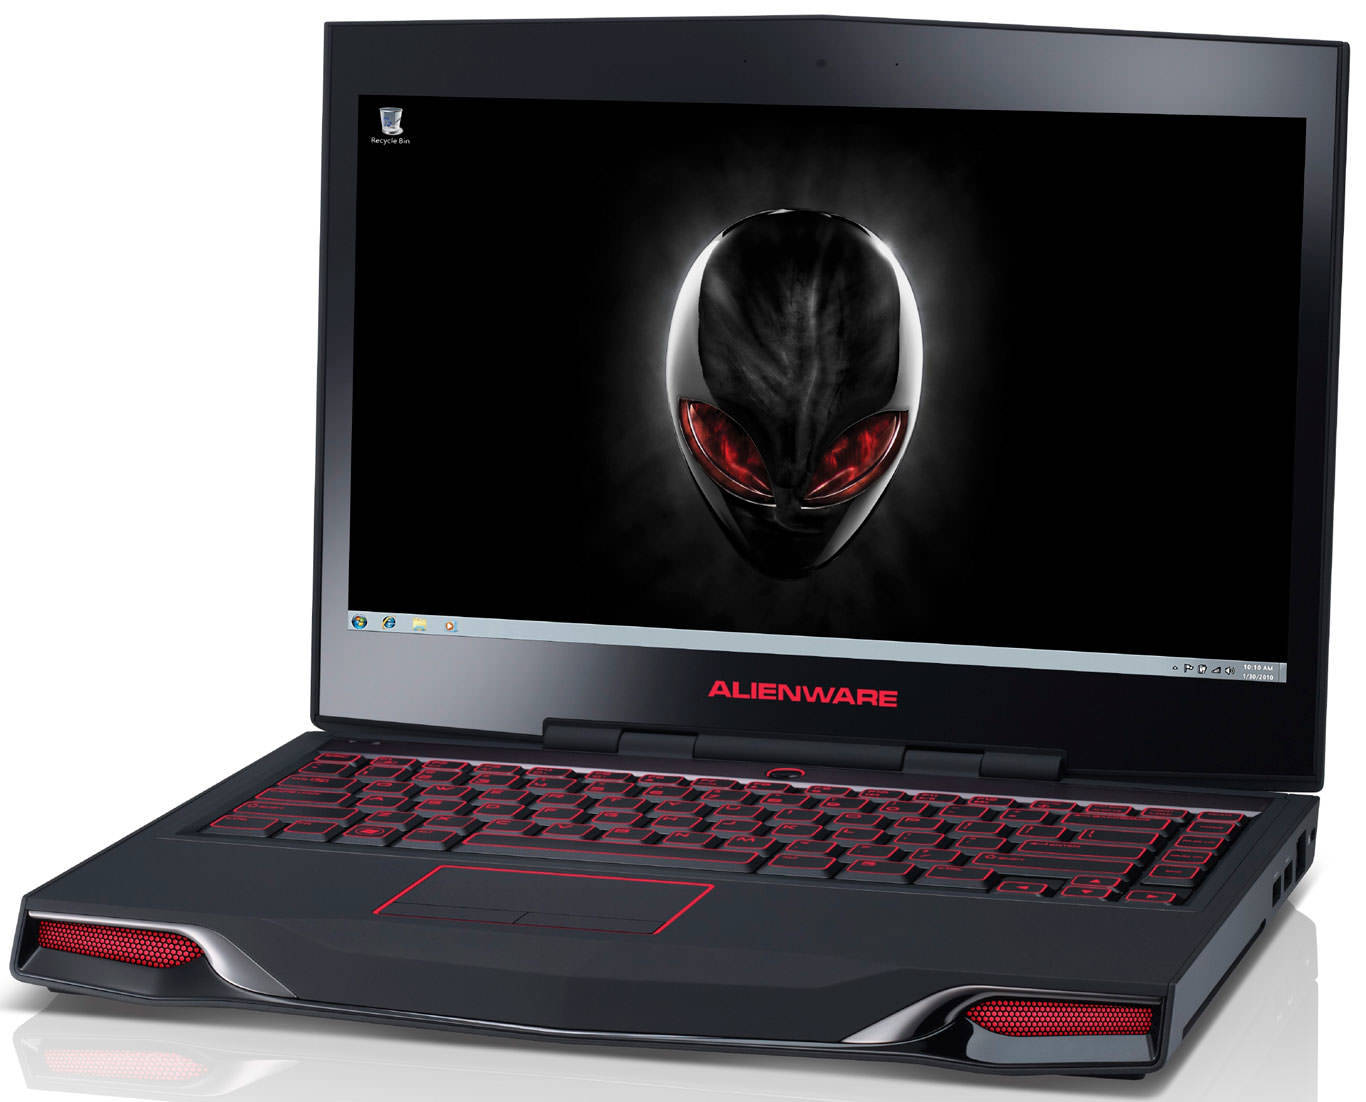 Dell Alienware Laptop M14x Price In India Full Specifications 30th Jan 21 At Gadgets Now